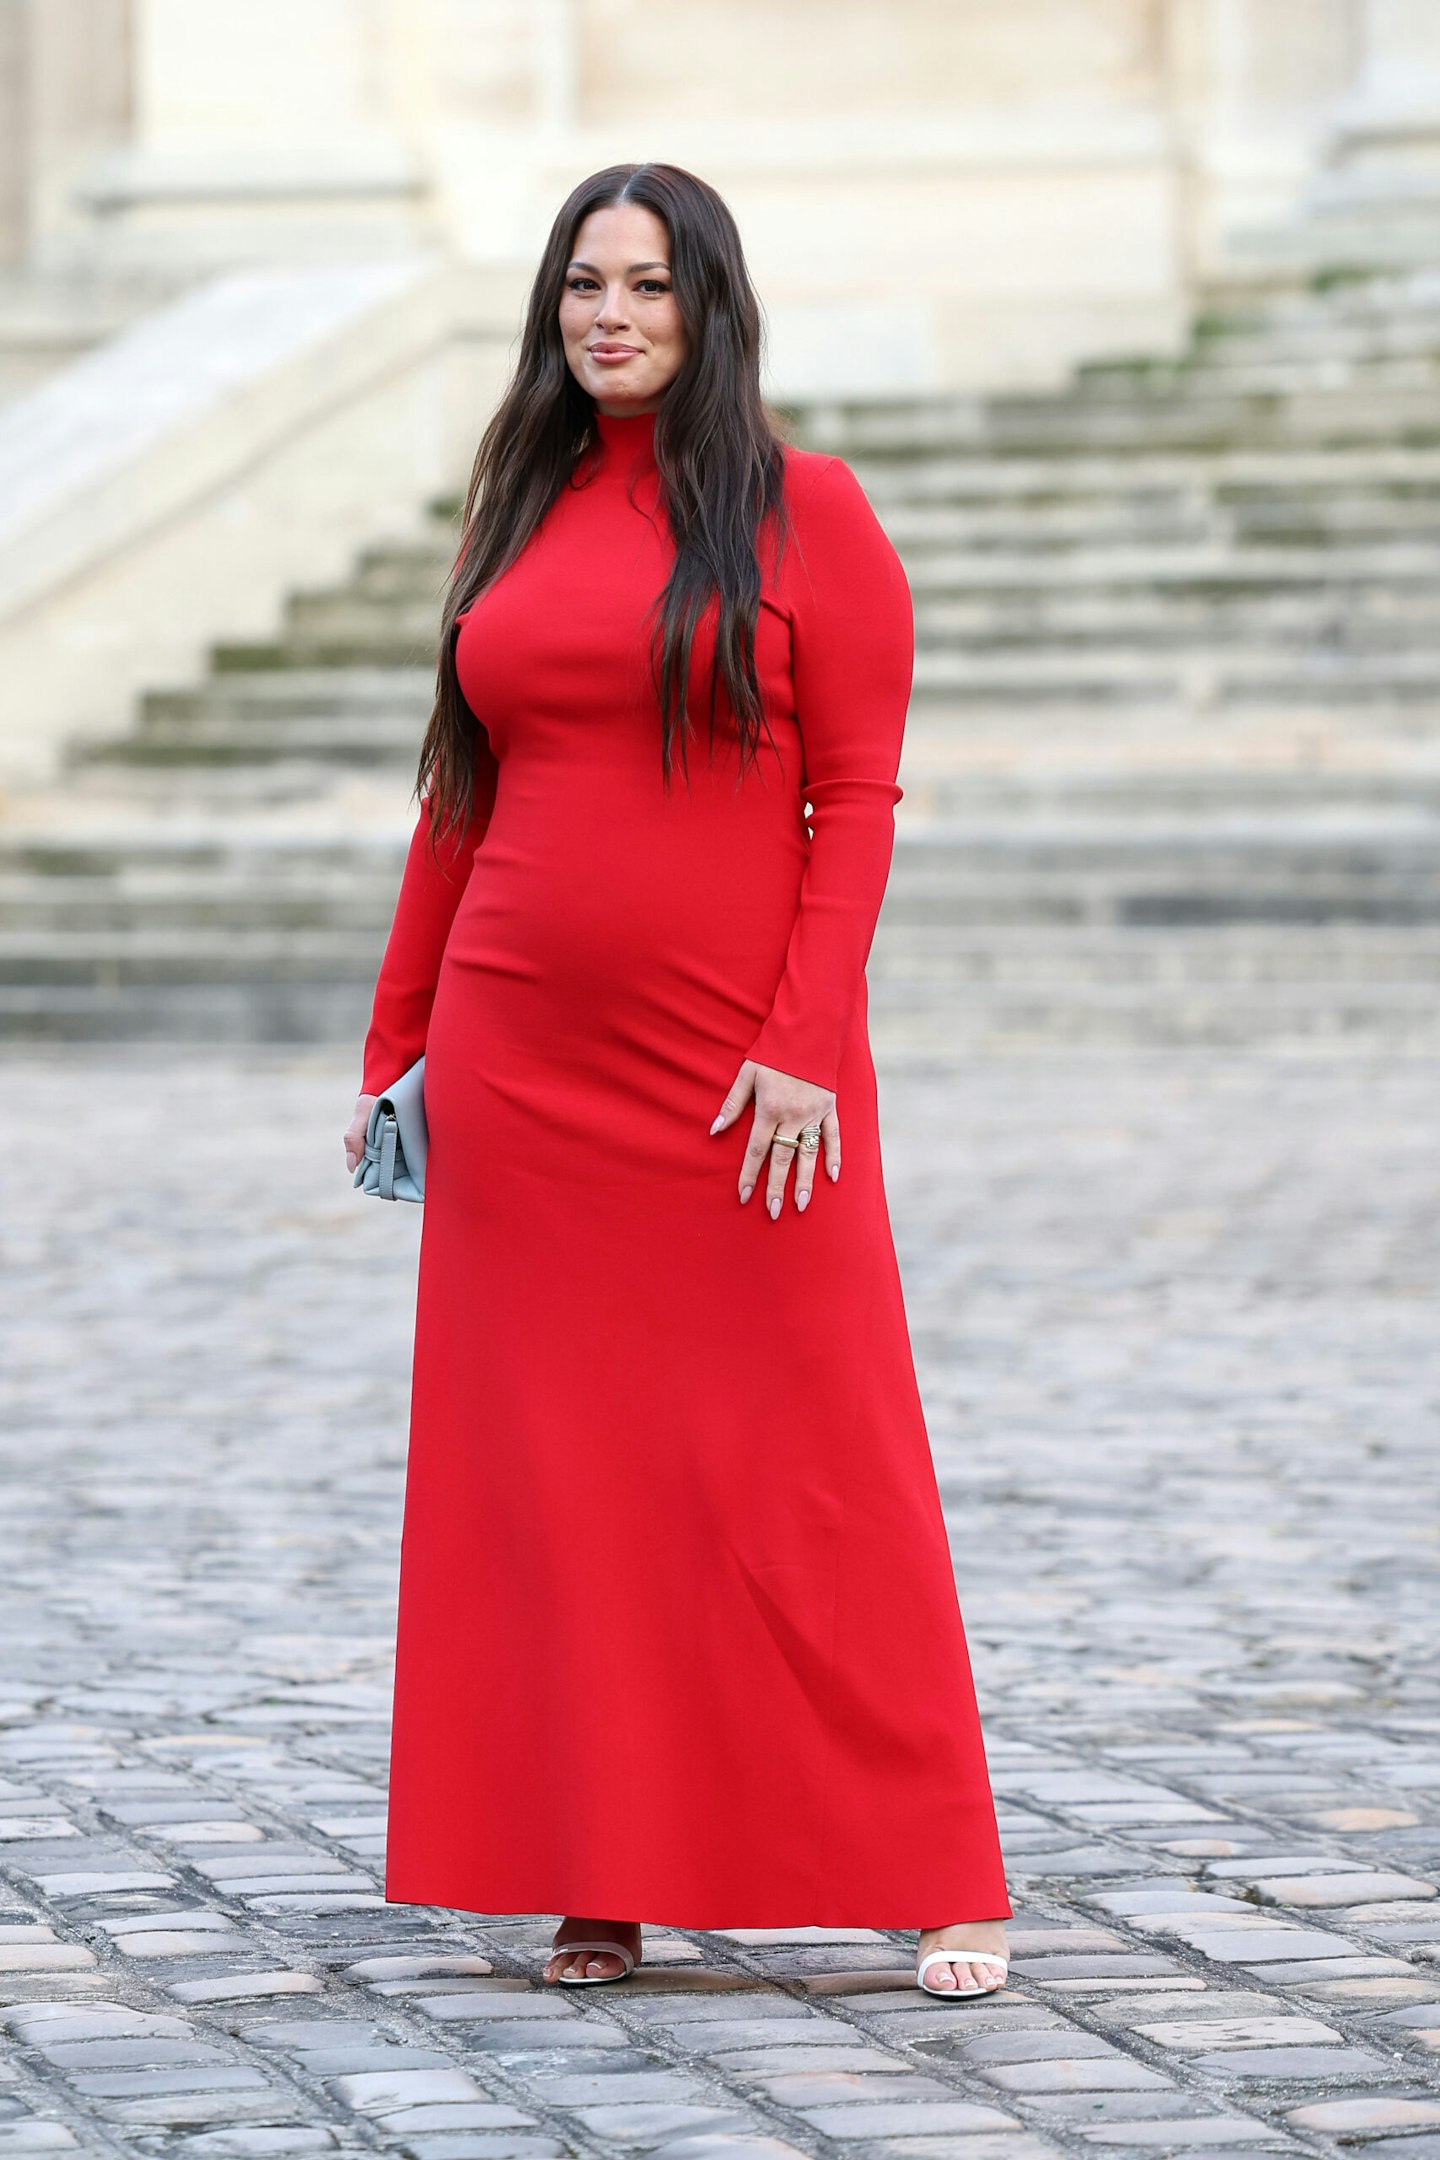 Ashley Graham attends the Victoria Beckham Womenswear Fall Winter 2023-2024 show as part of Paris Fashion Week on March 03, 2023 in Paris, France.